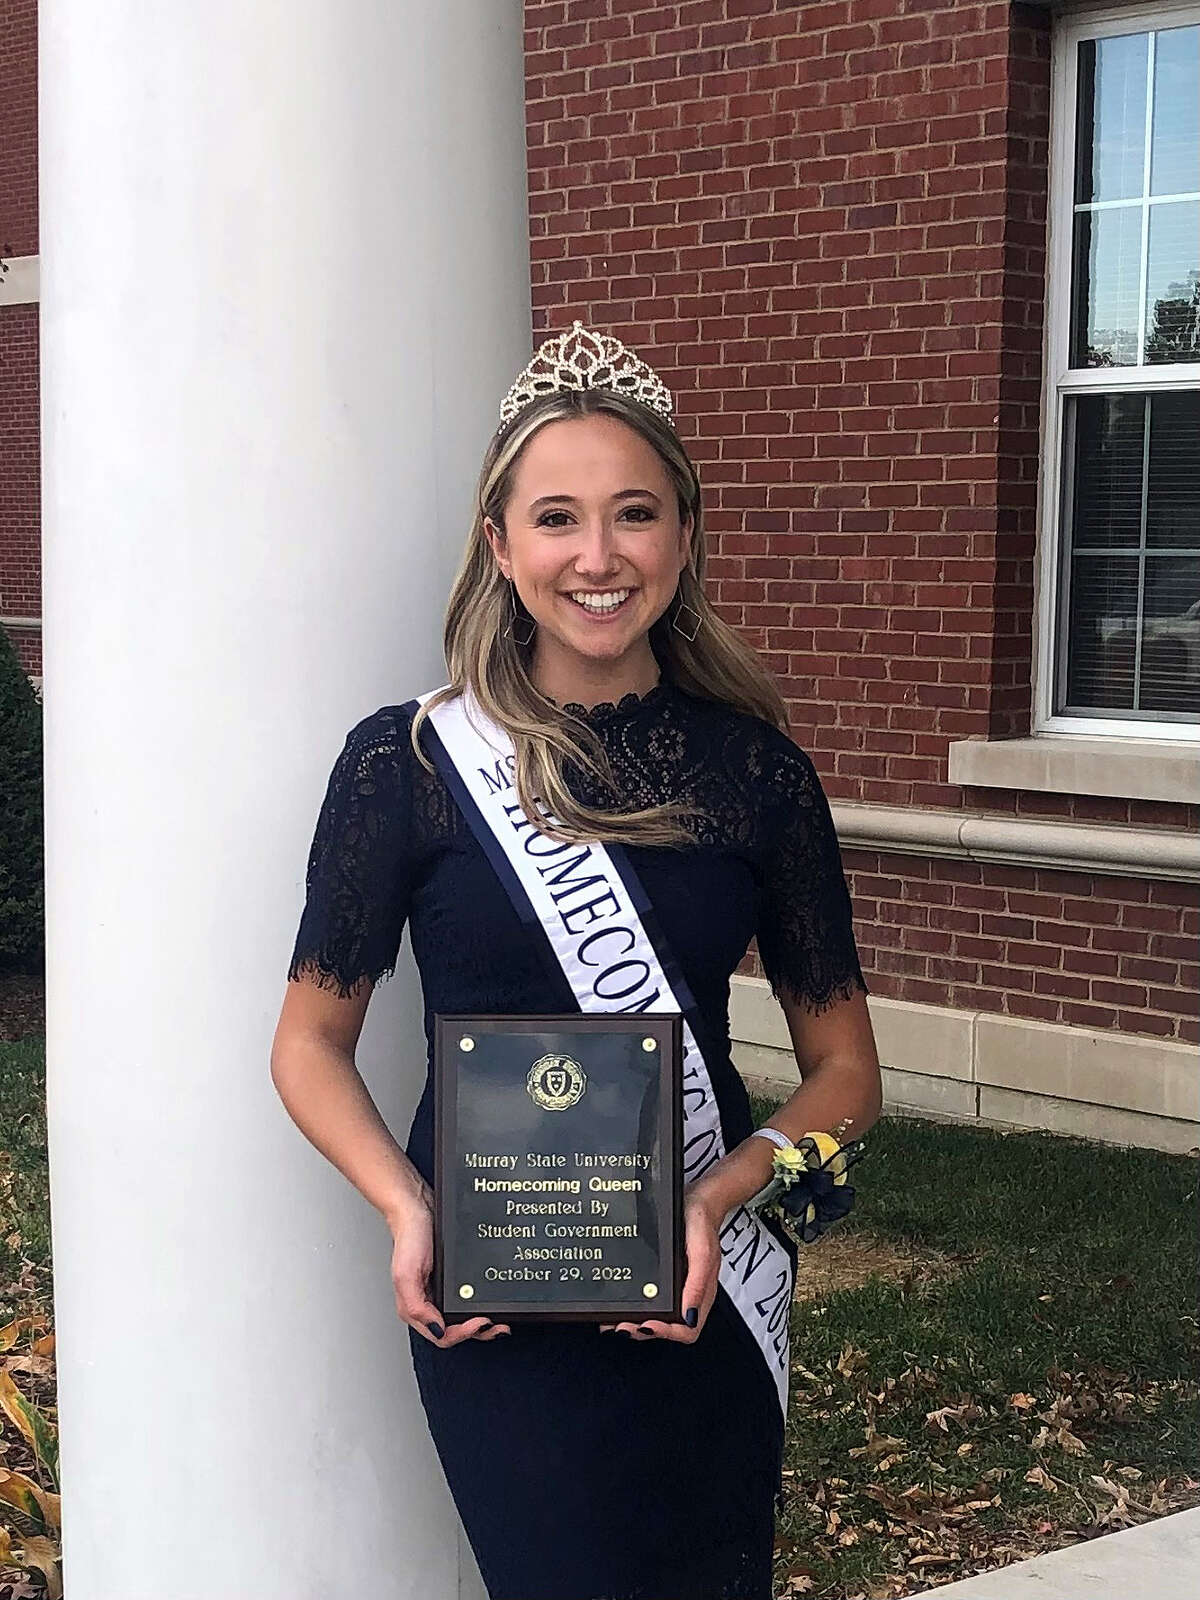 Olivia Badalamenti, a 2019 Metro-East Lutheran High School alumna, was recently named Murray State University Homecoming Queen. 